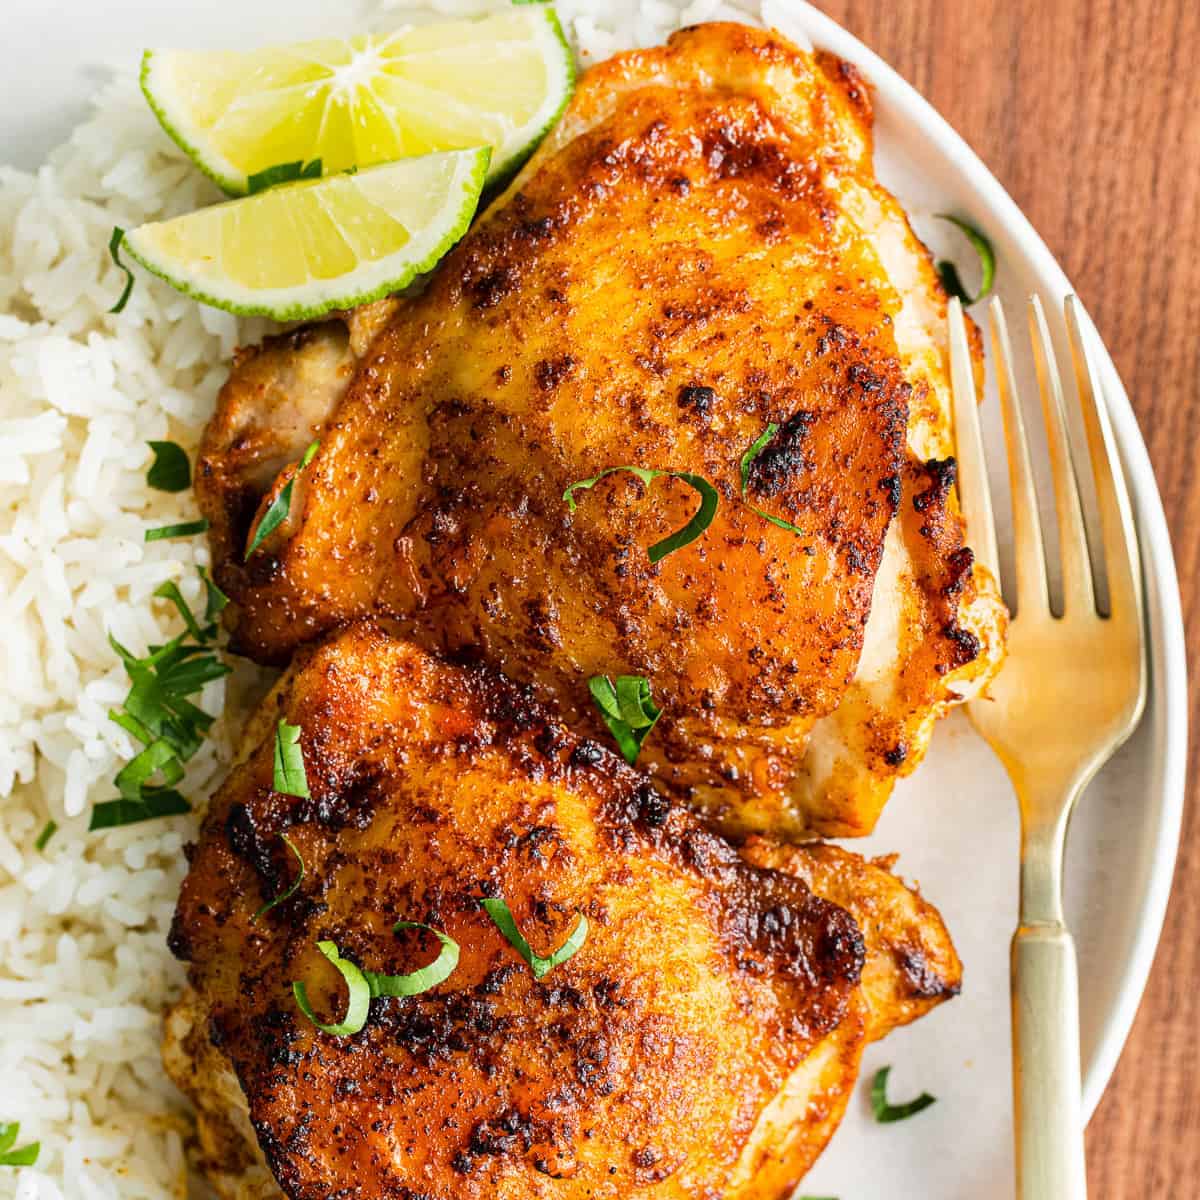 https://easychickenrecipes.com/wp-content/uploads/2021/03/featured-air-fryer-chili-lime-chicken-recipe.jpg